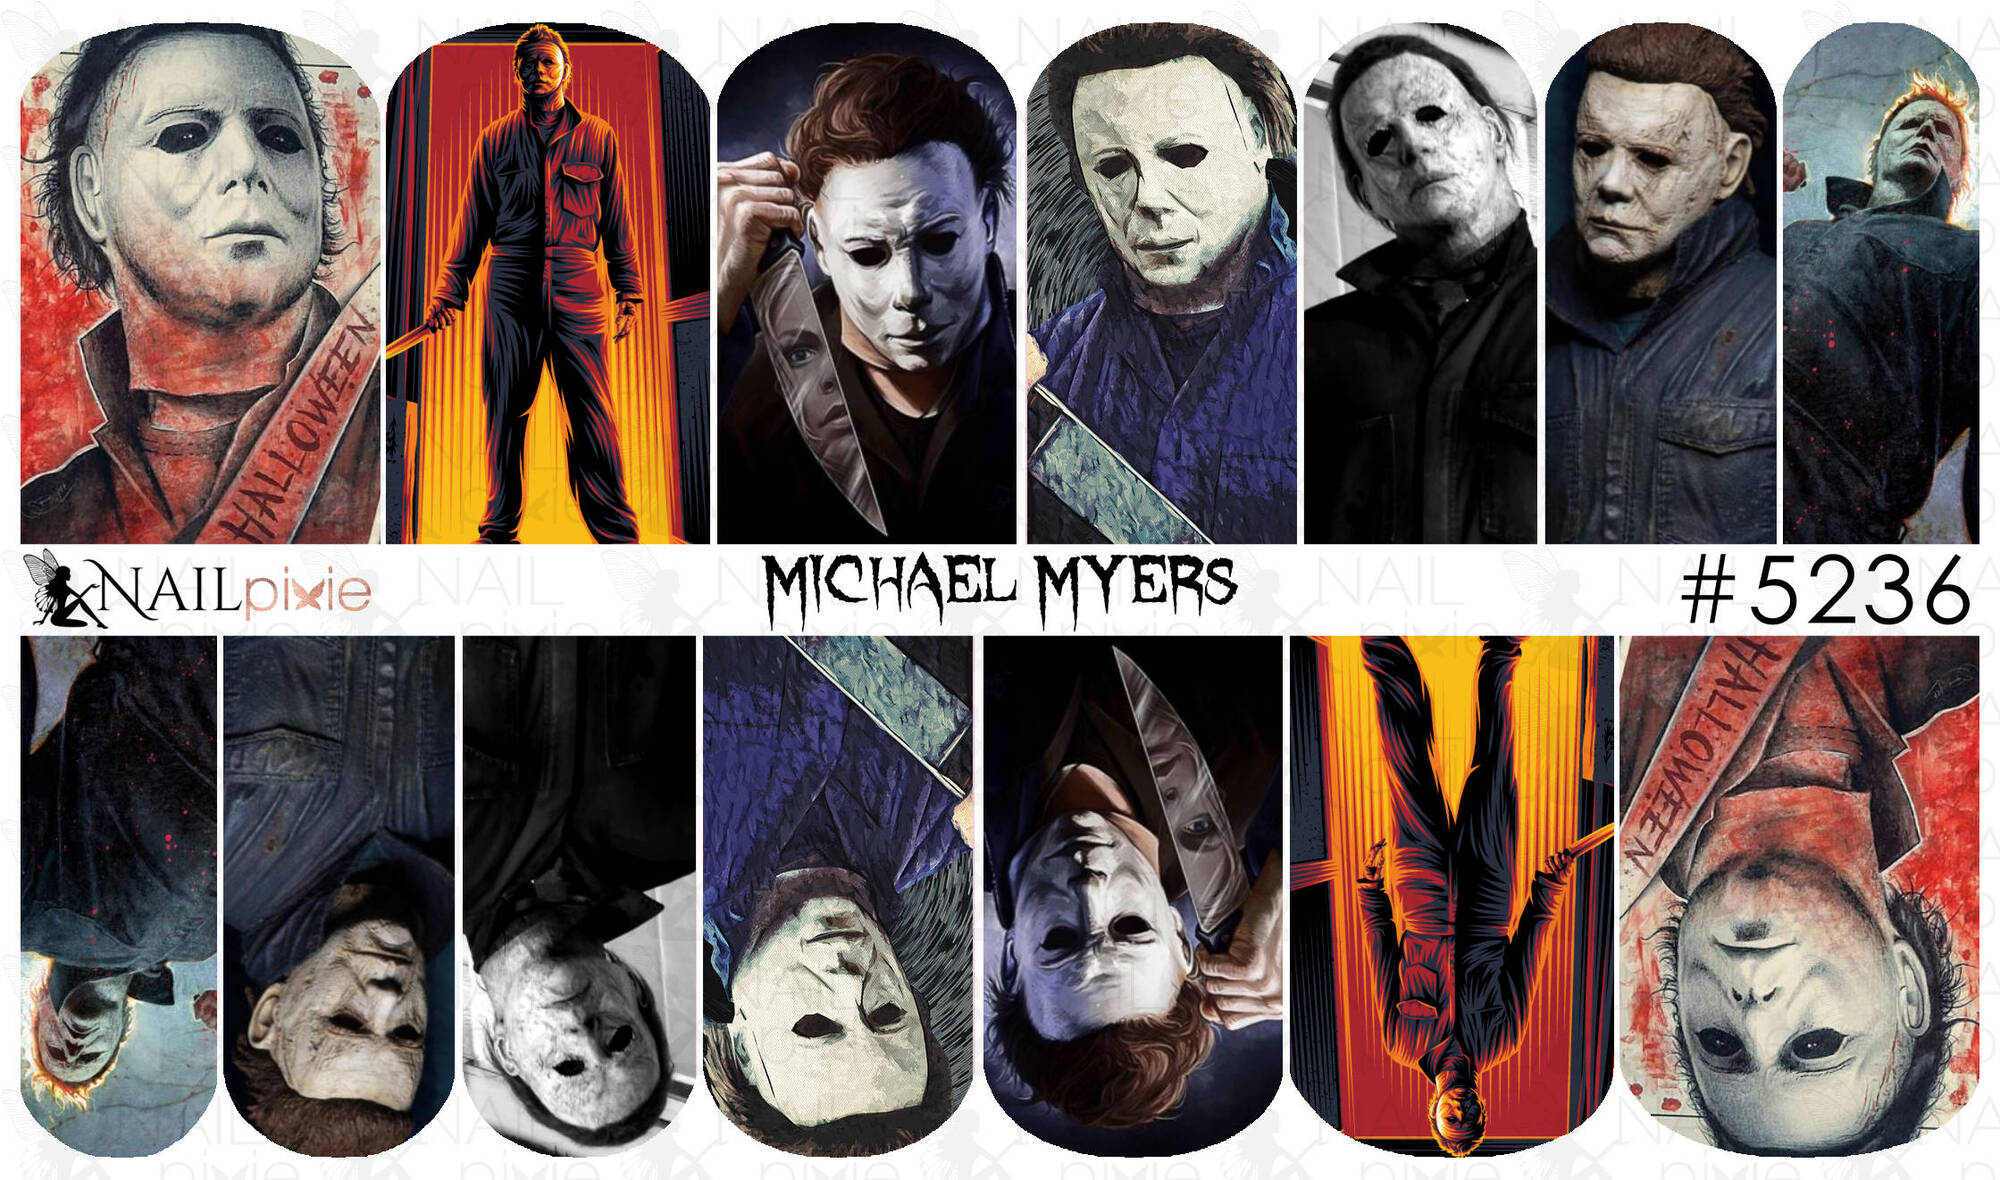 MICHAEL MYERS Halloween Full Cover Nail Decal Art Water ...